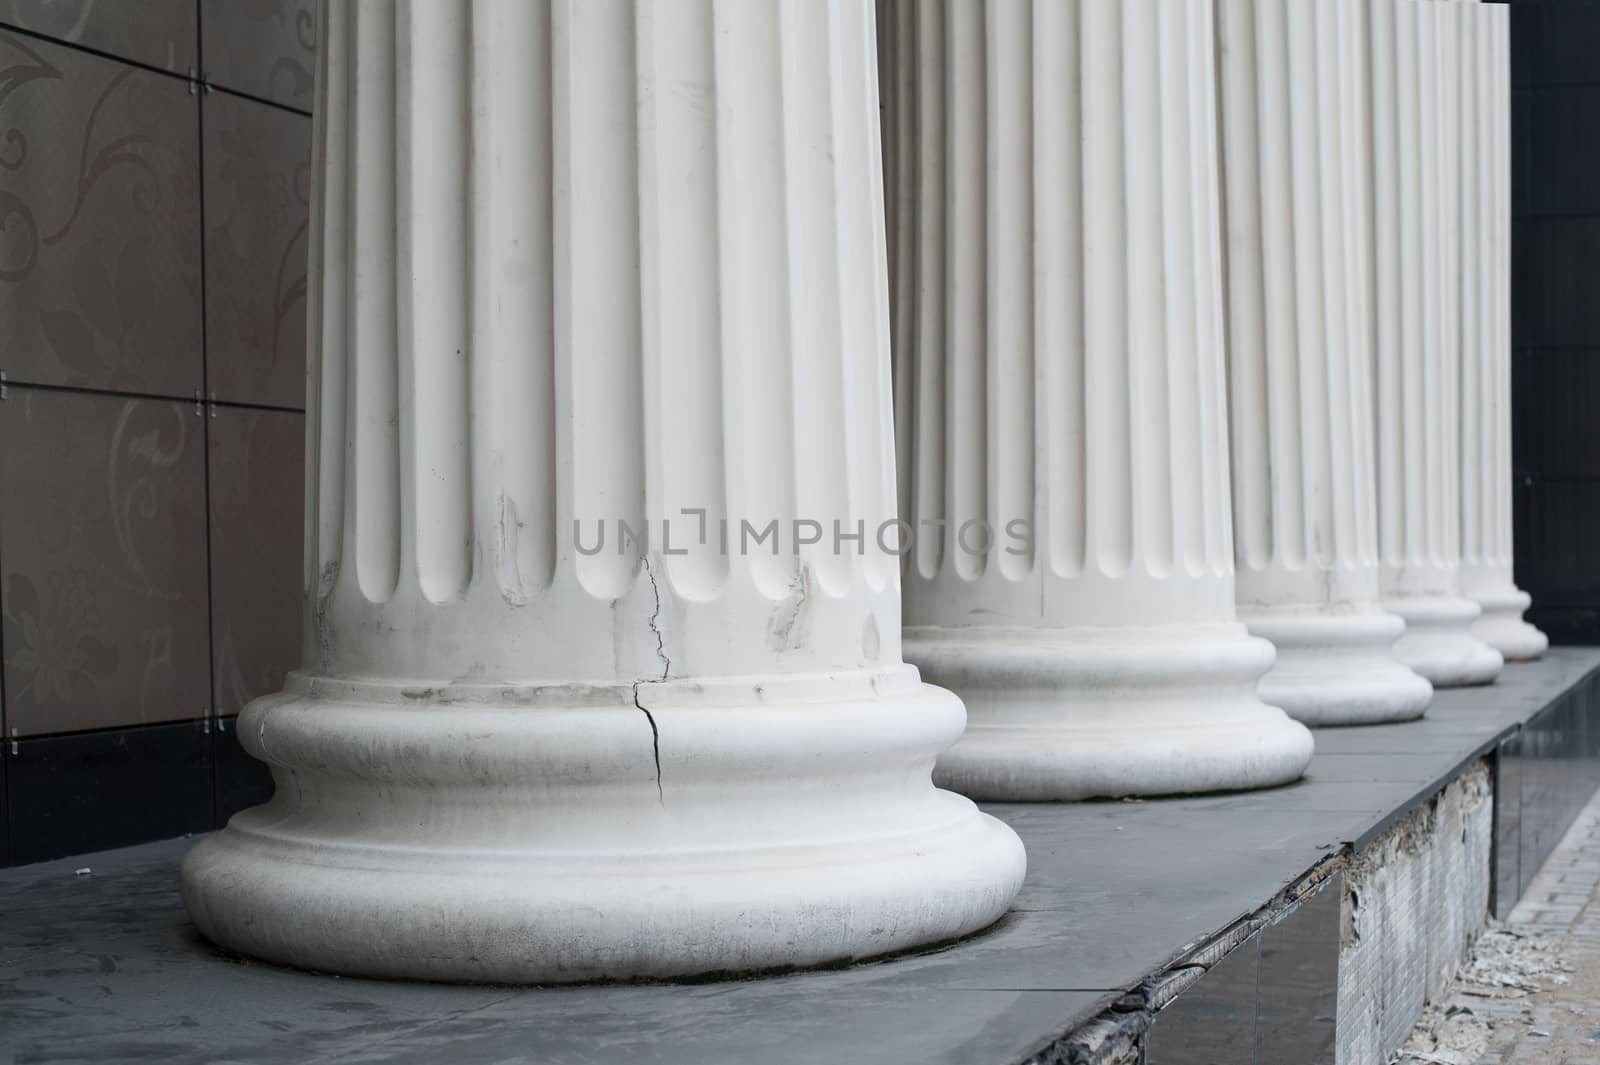 White columns on the facade of the building.